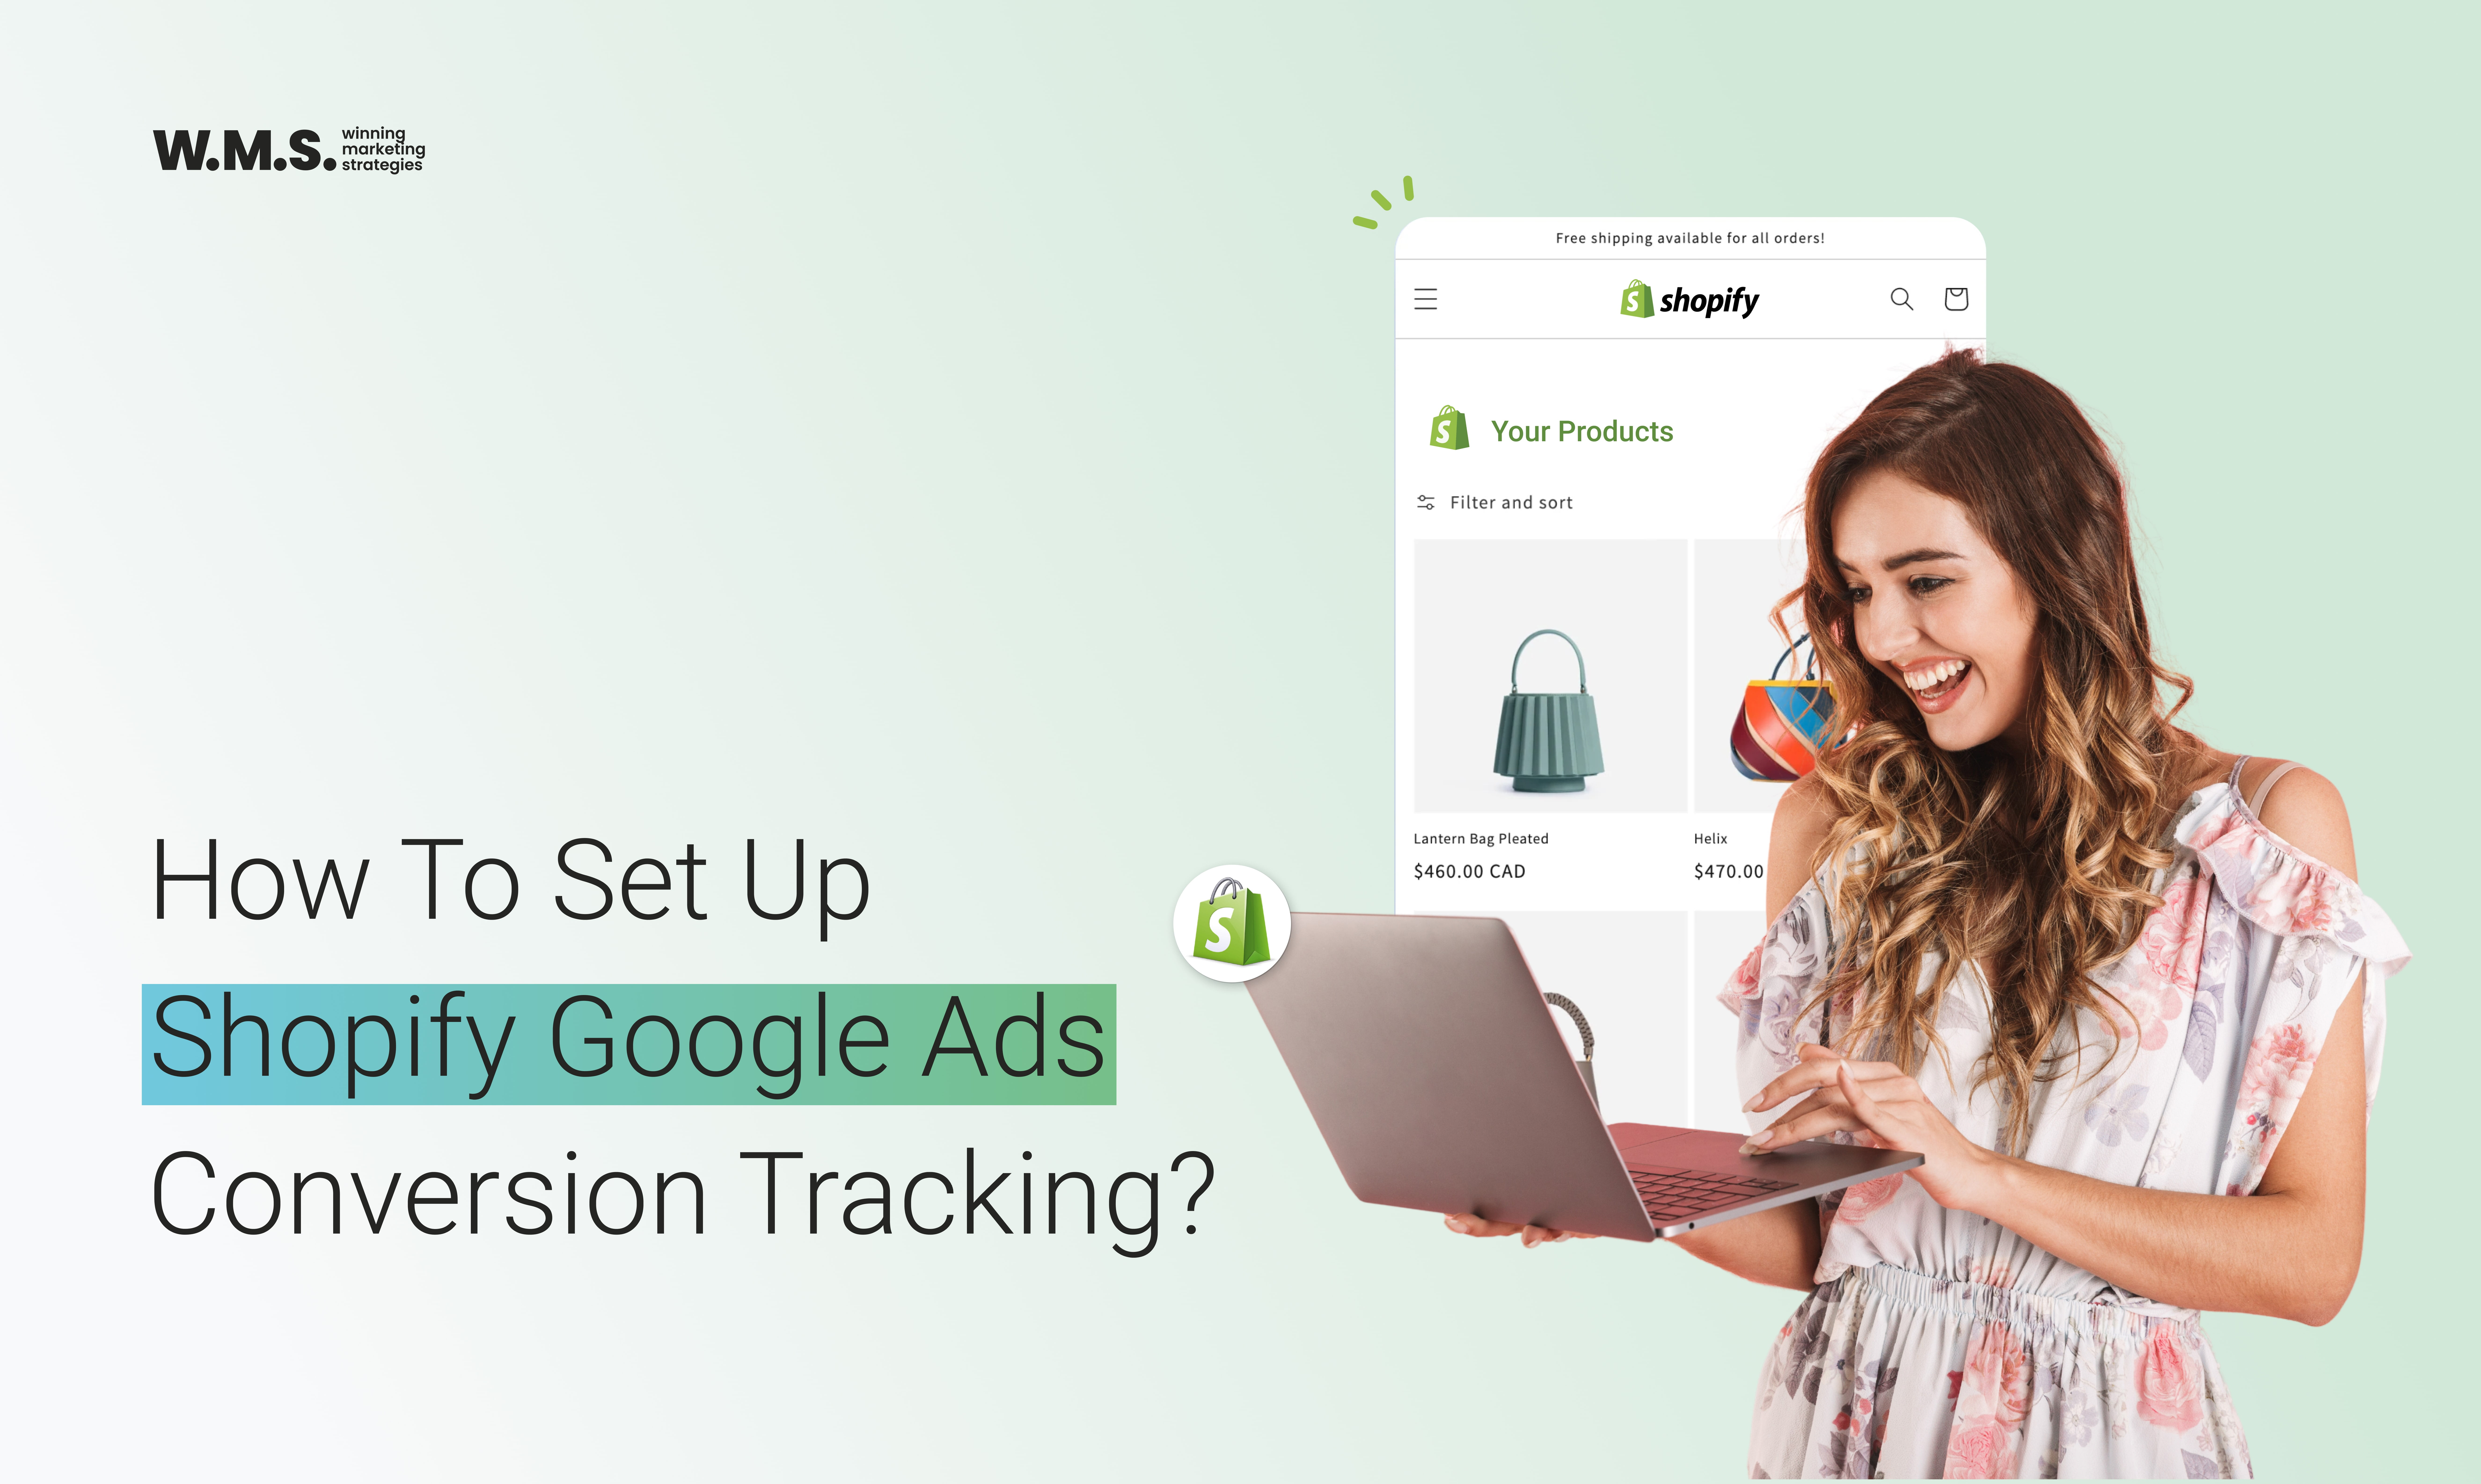 Shopify Google Ads Conversion Tracking